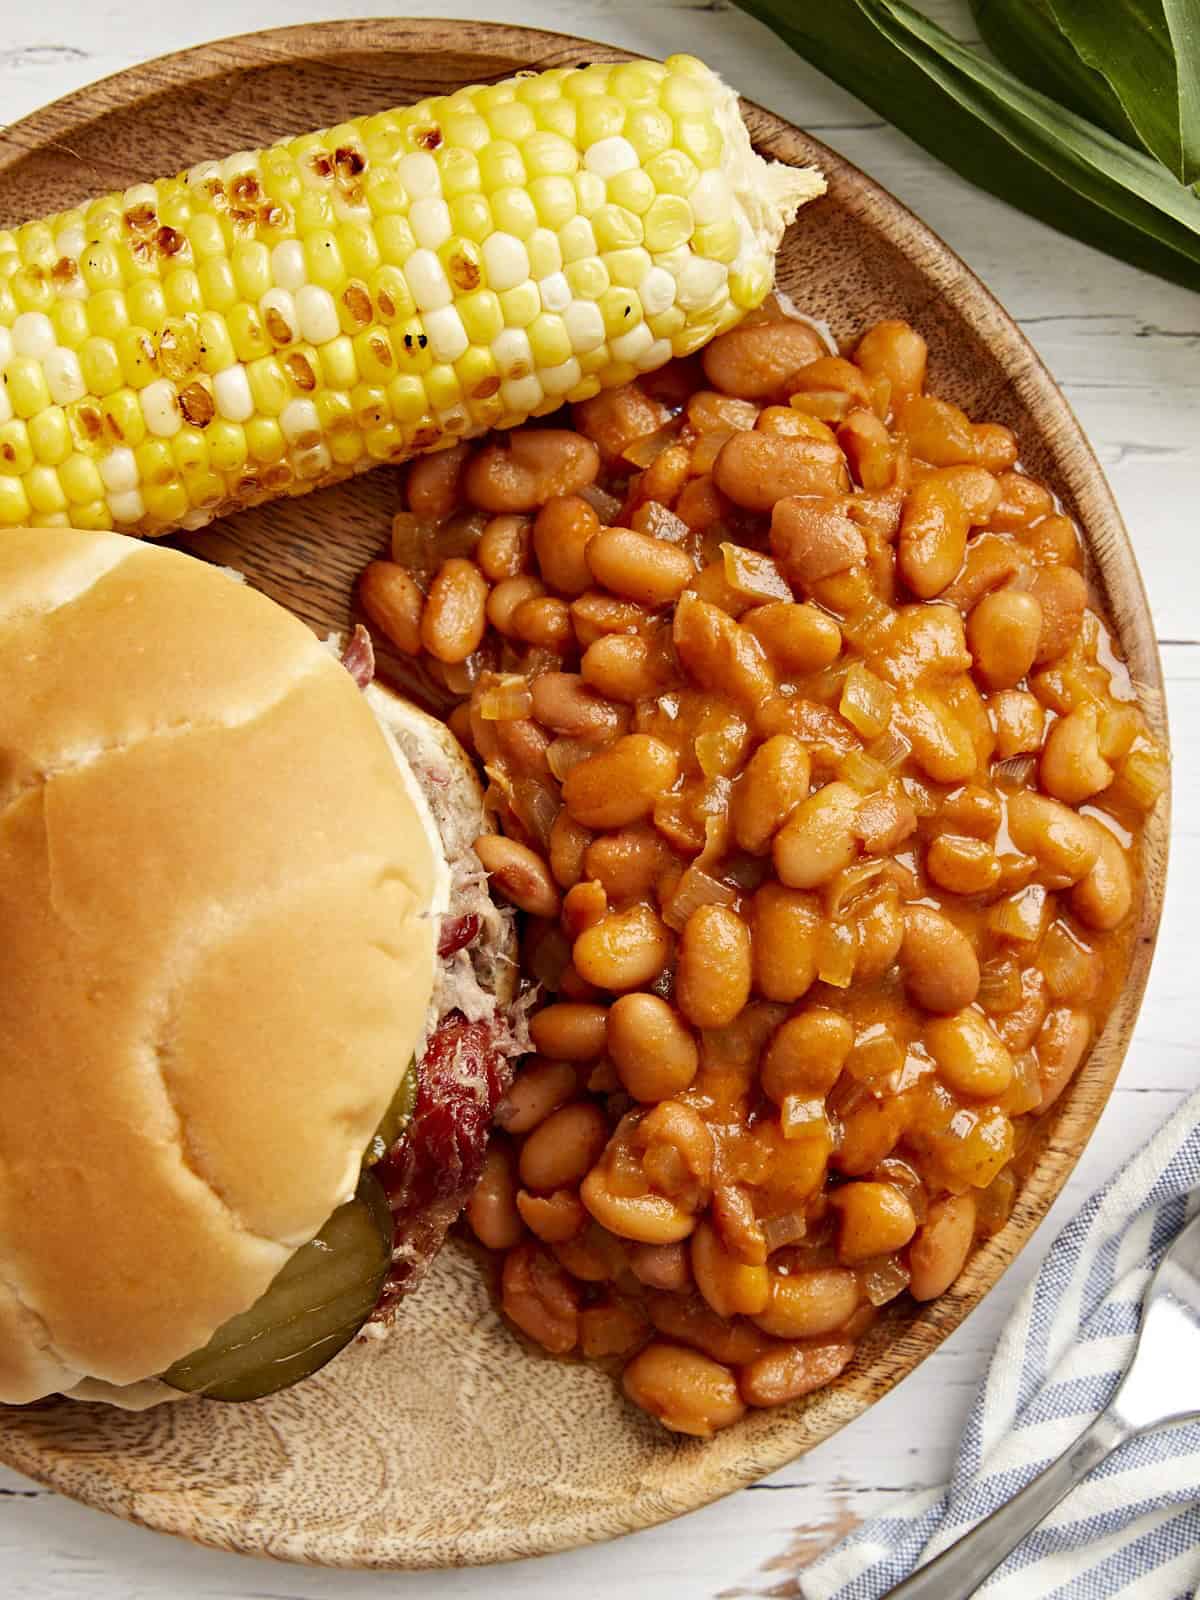 overhead view of a serving of baked beans on a plate with a sandwich and corn on the cob.